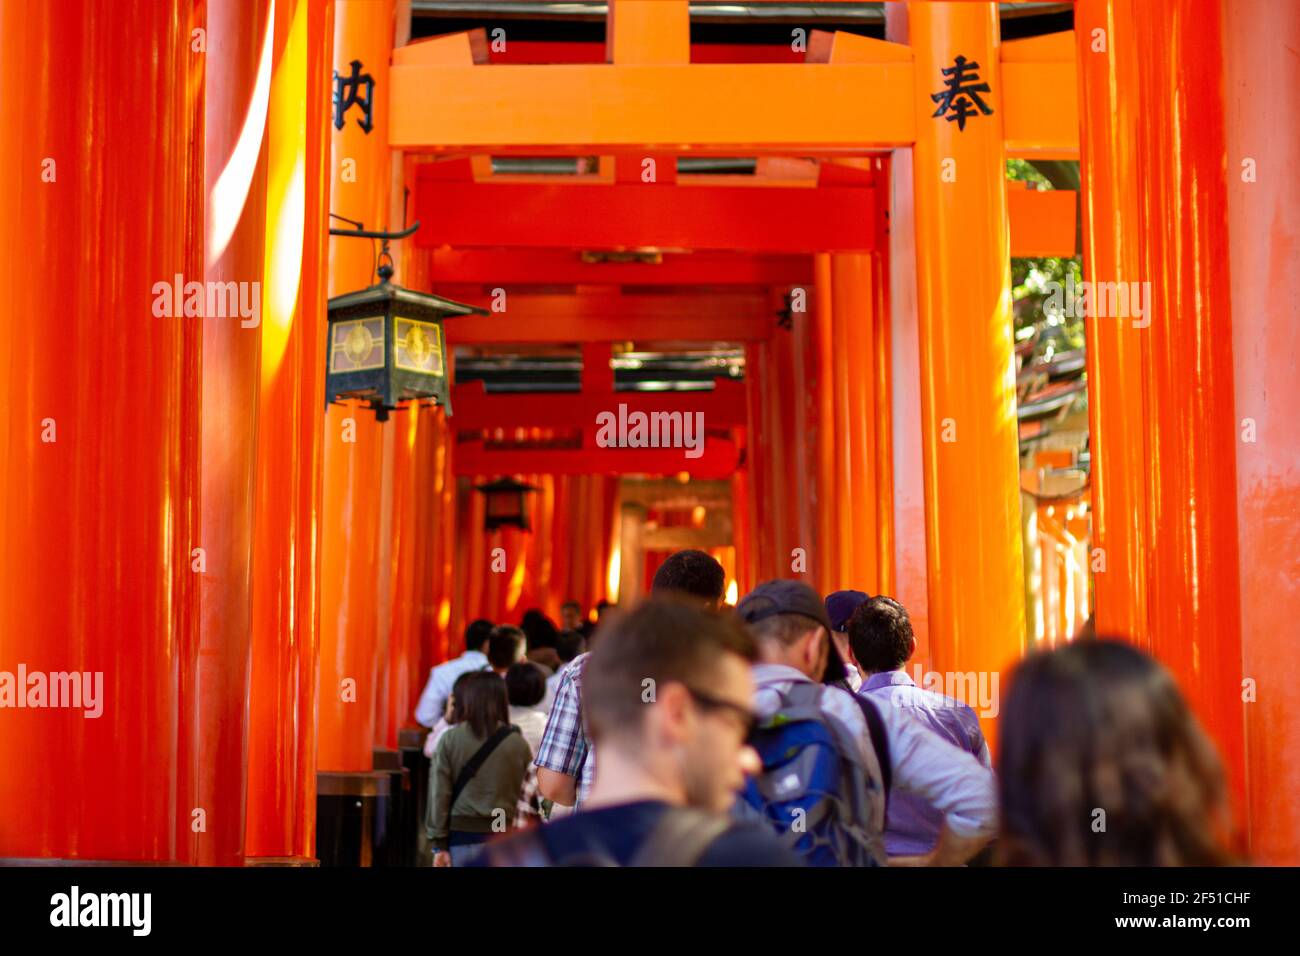 As you walk through the torii, it's believed that you express your worship as you aproach the inner shrine. Stock Photo